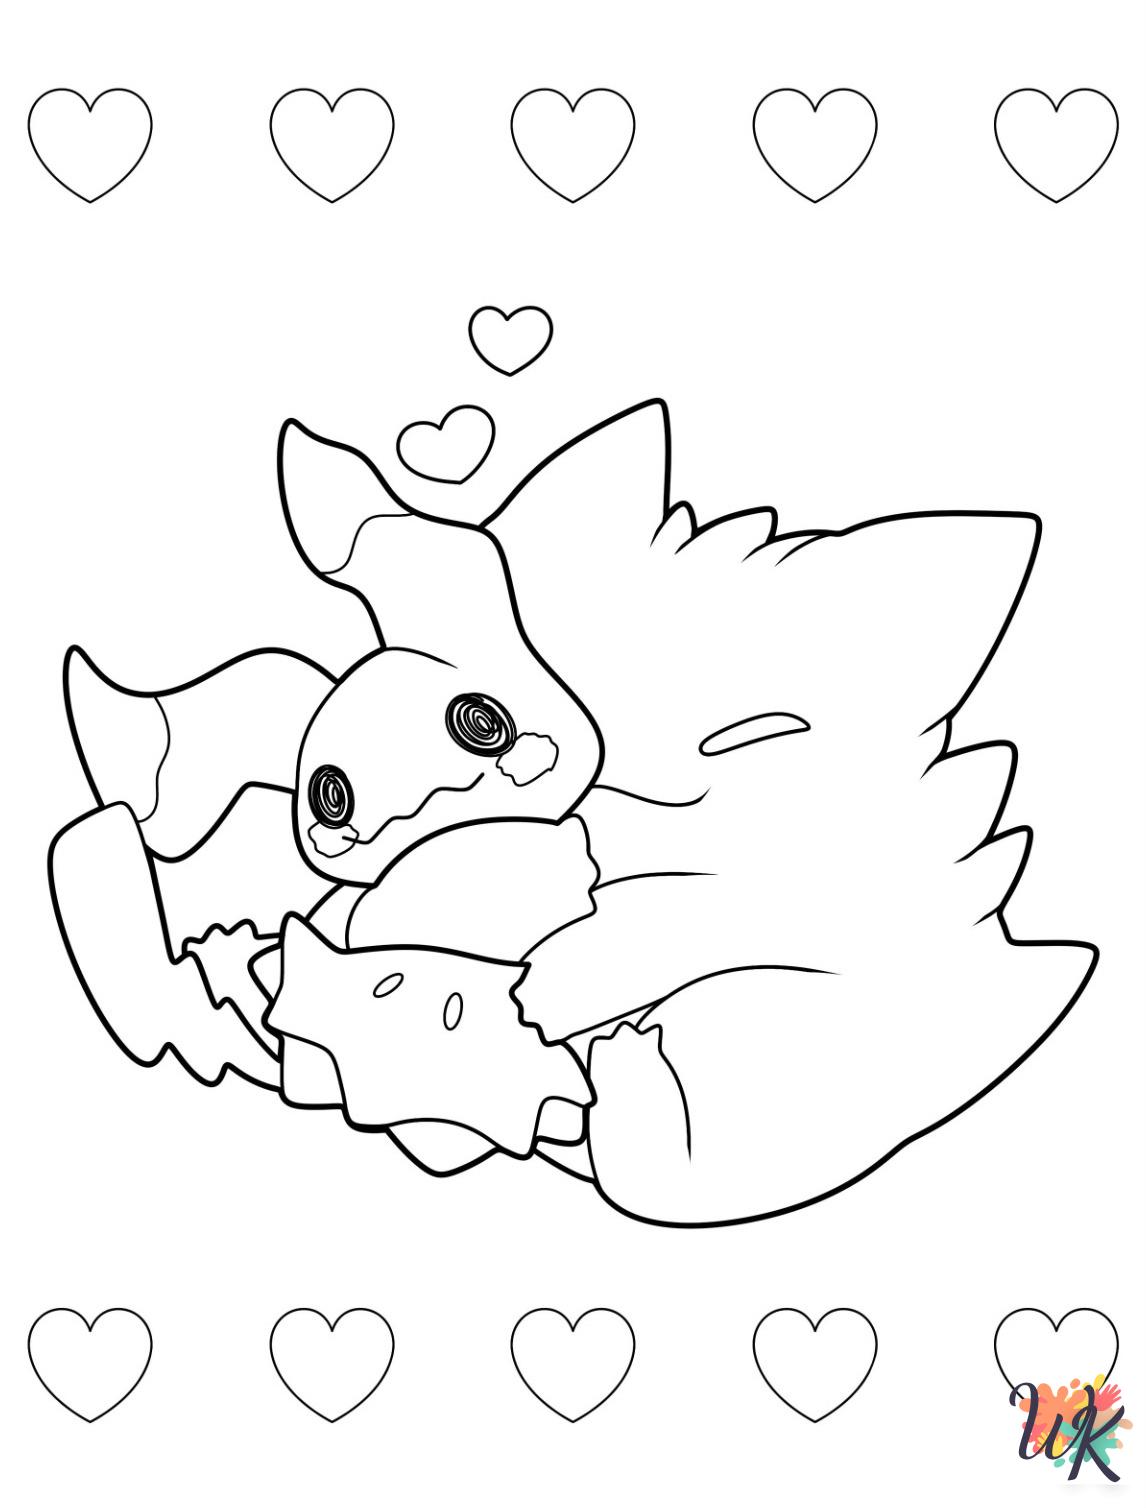 Gengar decorations coloring pages